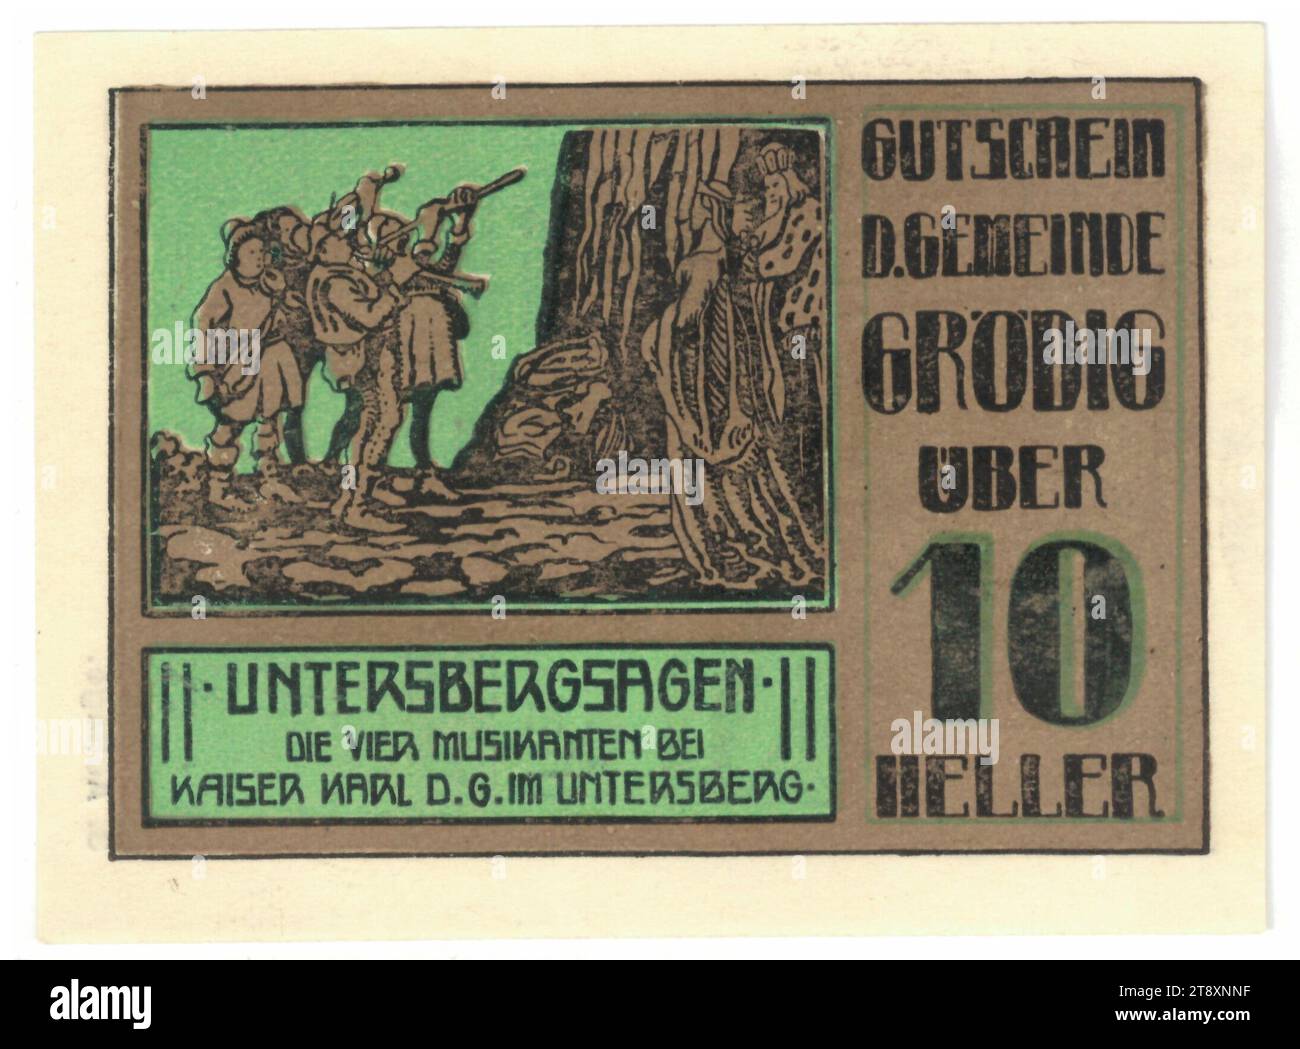 Voucher, 10 Heller, Municipality of Grödig (Salzburg), Mint Authority, Date before 31.12.1920, Paper, Print, Height 65 mm, Width 88 mm, Mint Area, Austria, 1st Republic (1918-1933), Finance, Trade Mark, Private Coin, Making Music; Musician with Instrument, The Vienna Collection Stock Photo